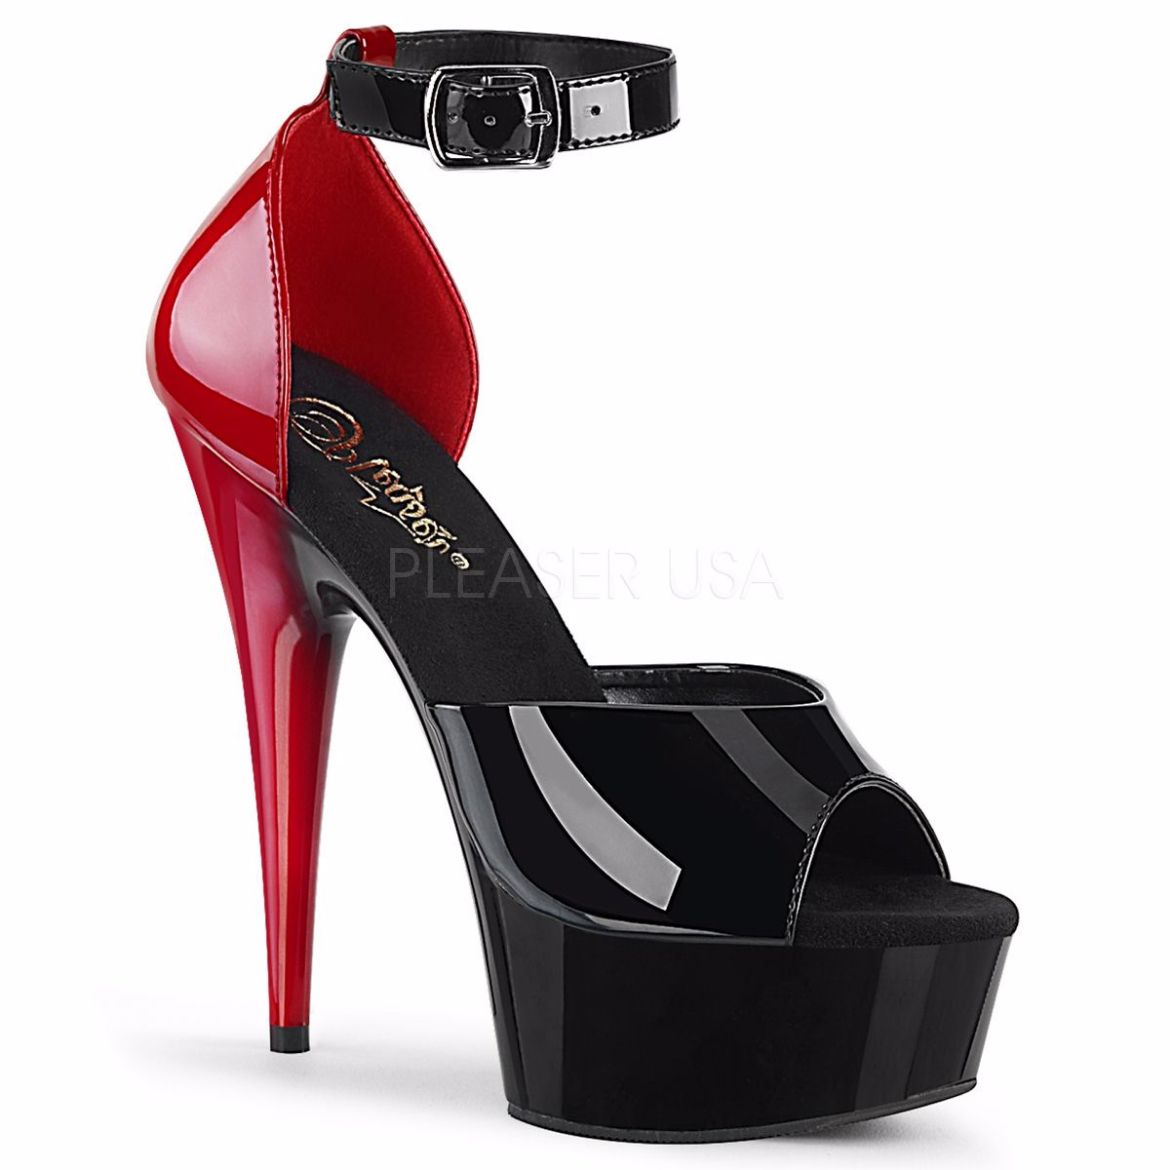 Product image of Pleaser DELIGHT-617 Black-Red Patent/Black-Red 6 inch (15.2 cm) Heel 1 3/4 inch (4.5 cm) Platform Two Tone Ankle Strap D'orsay Sandal Shoes